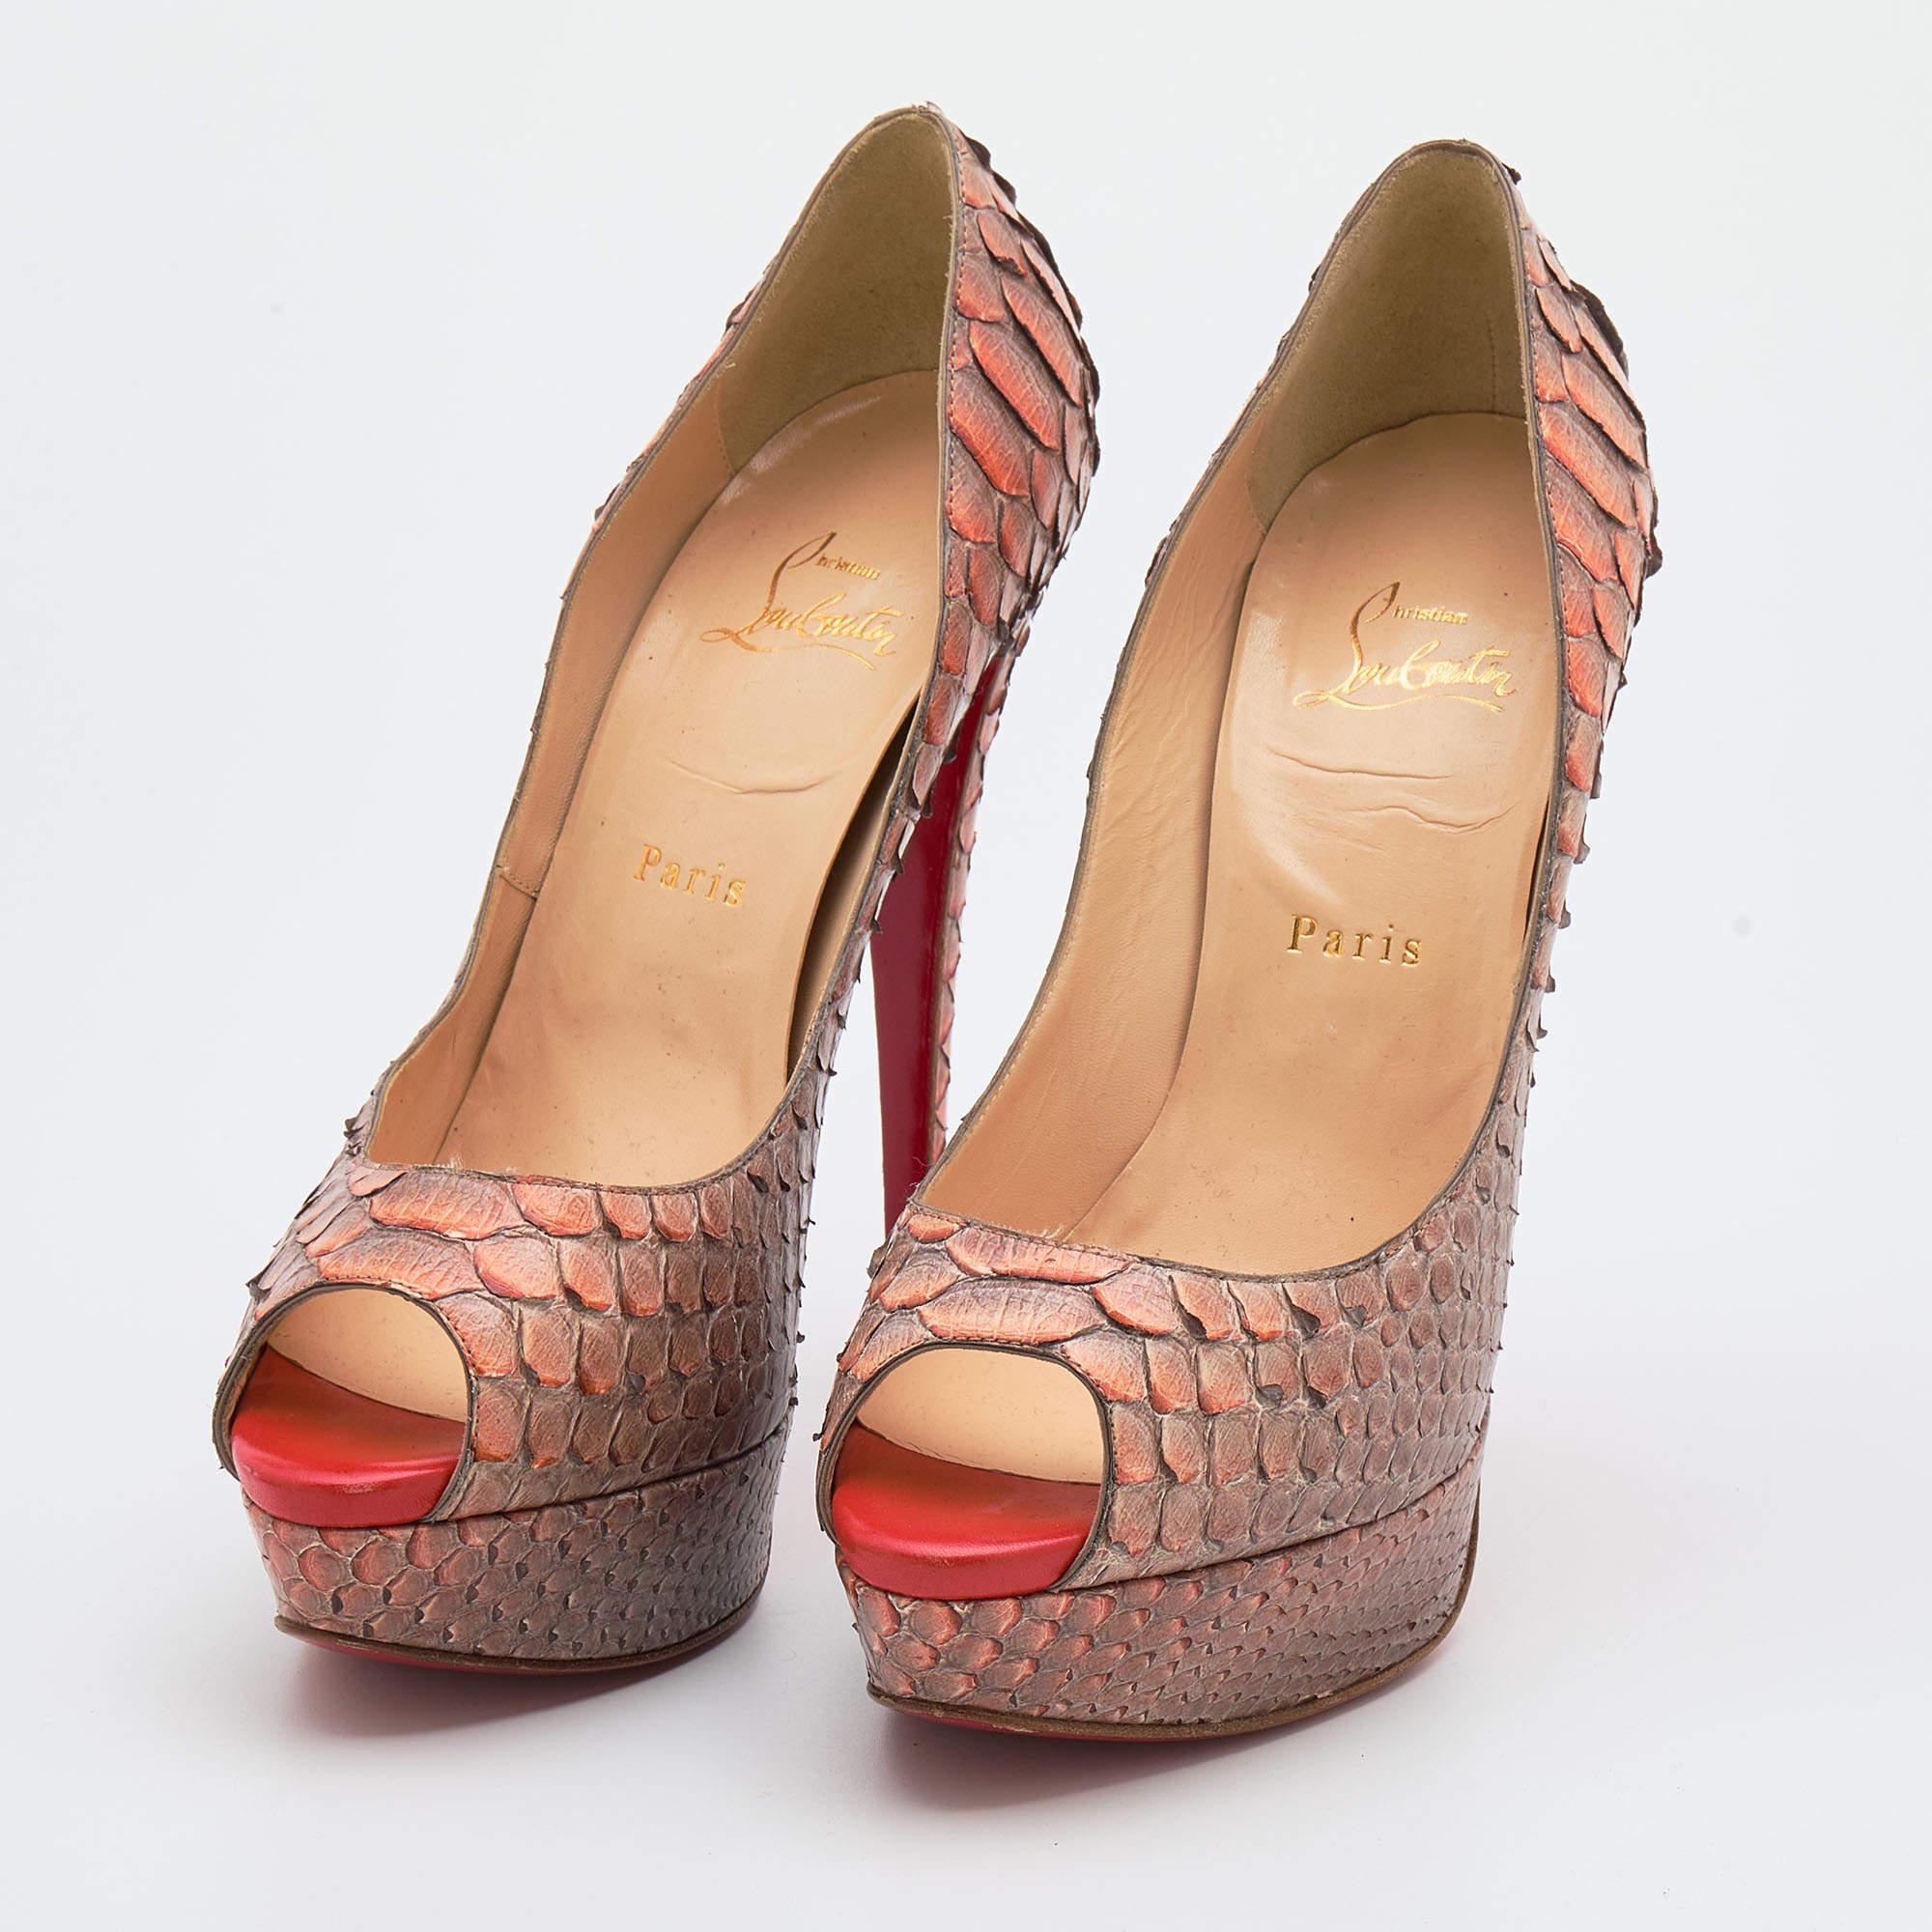 The architectural silhouette and precise cuts of this pair of pumps from Christian Louboutin exemplify the brand's mastery in the art of stiletto making. Finely created from python leather, it has been detailed with 14.5cm heels and platforms. The